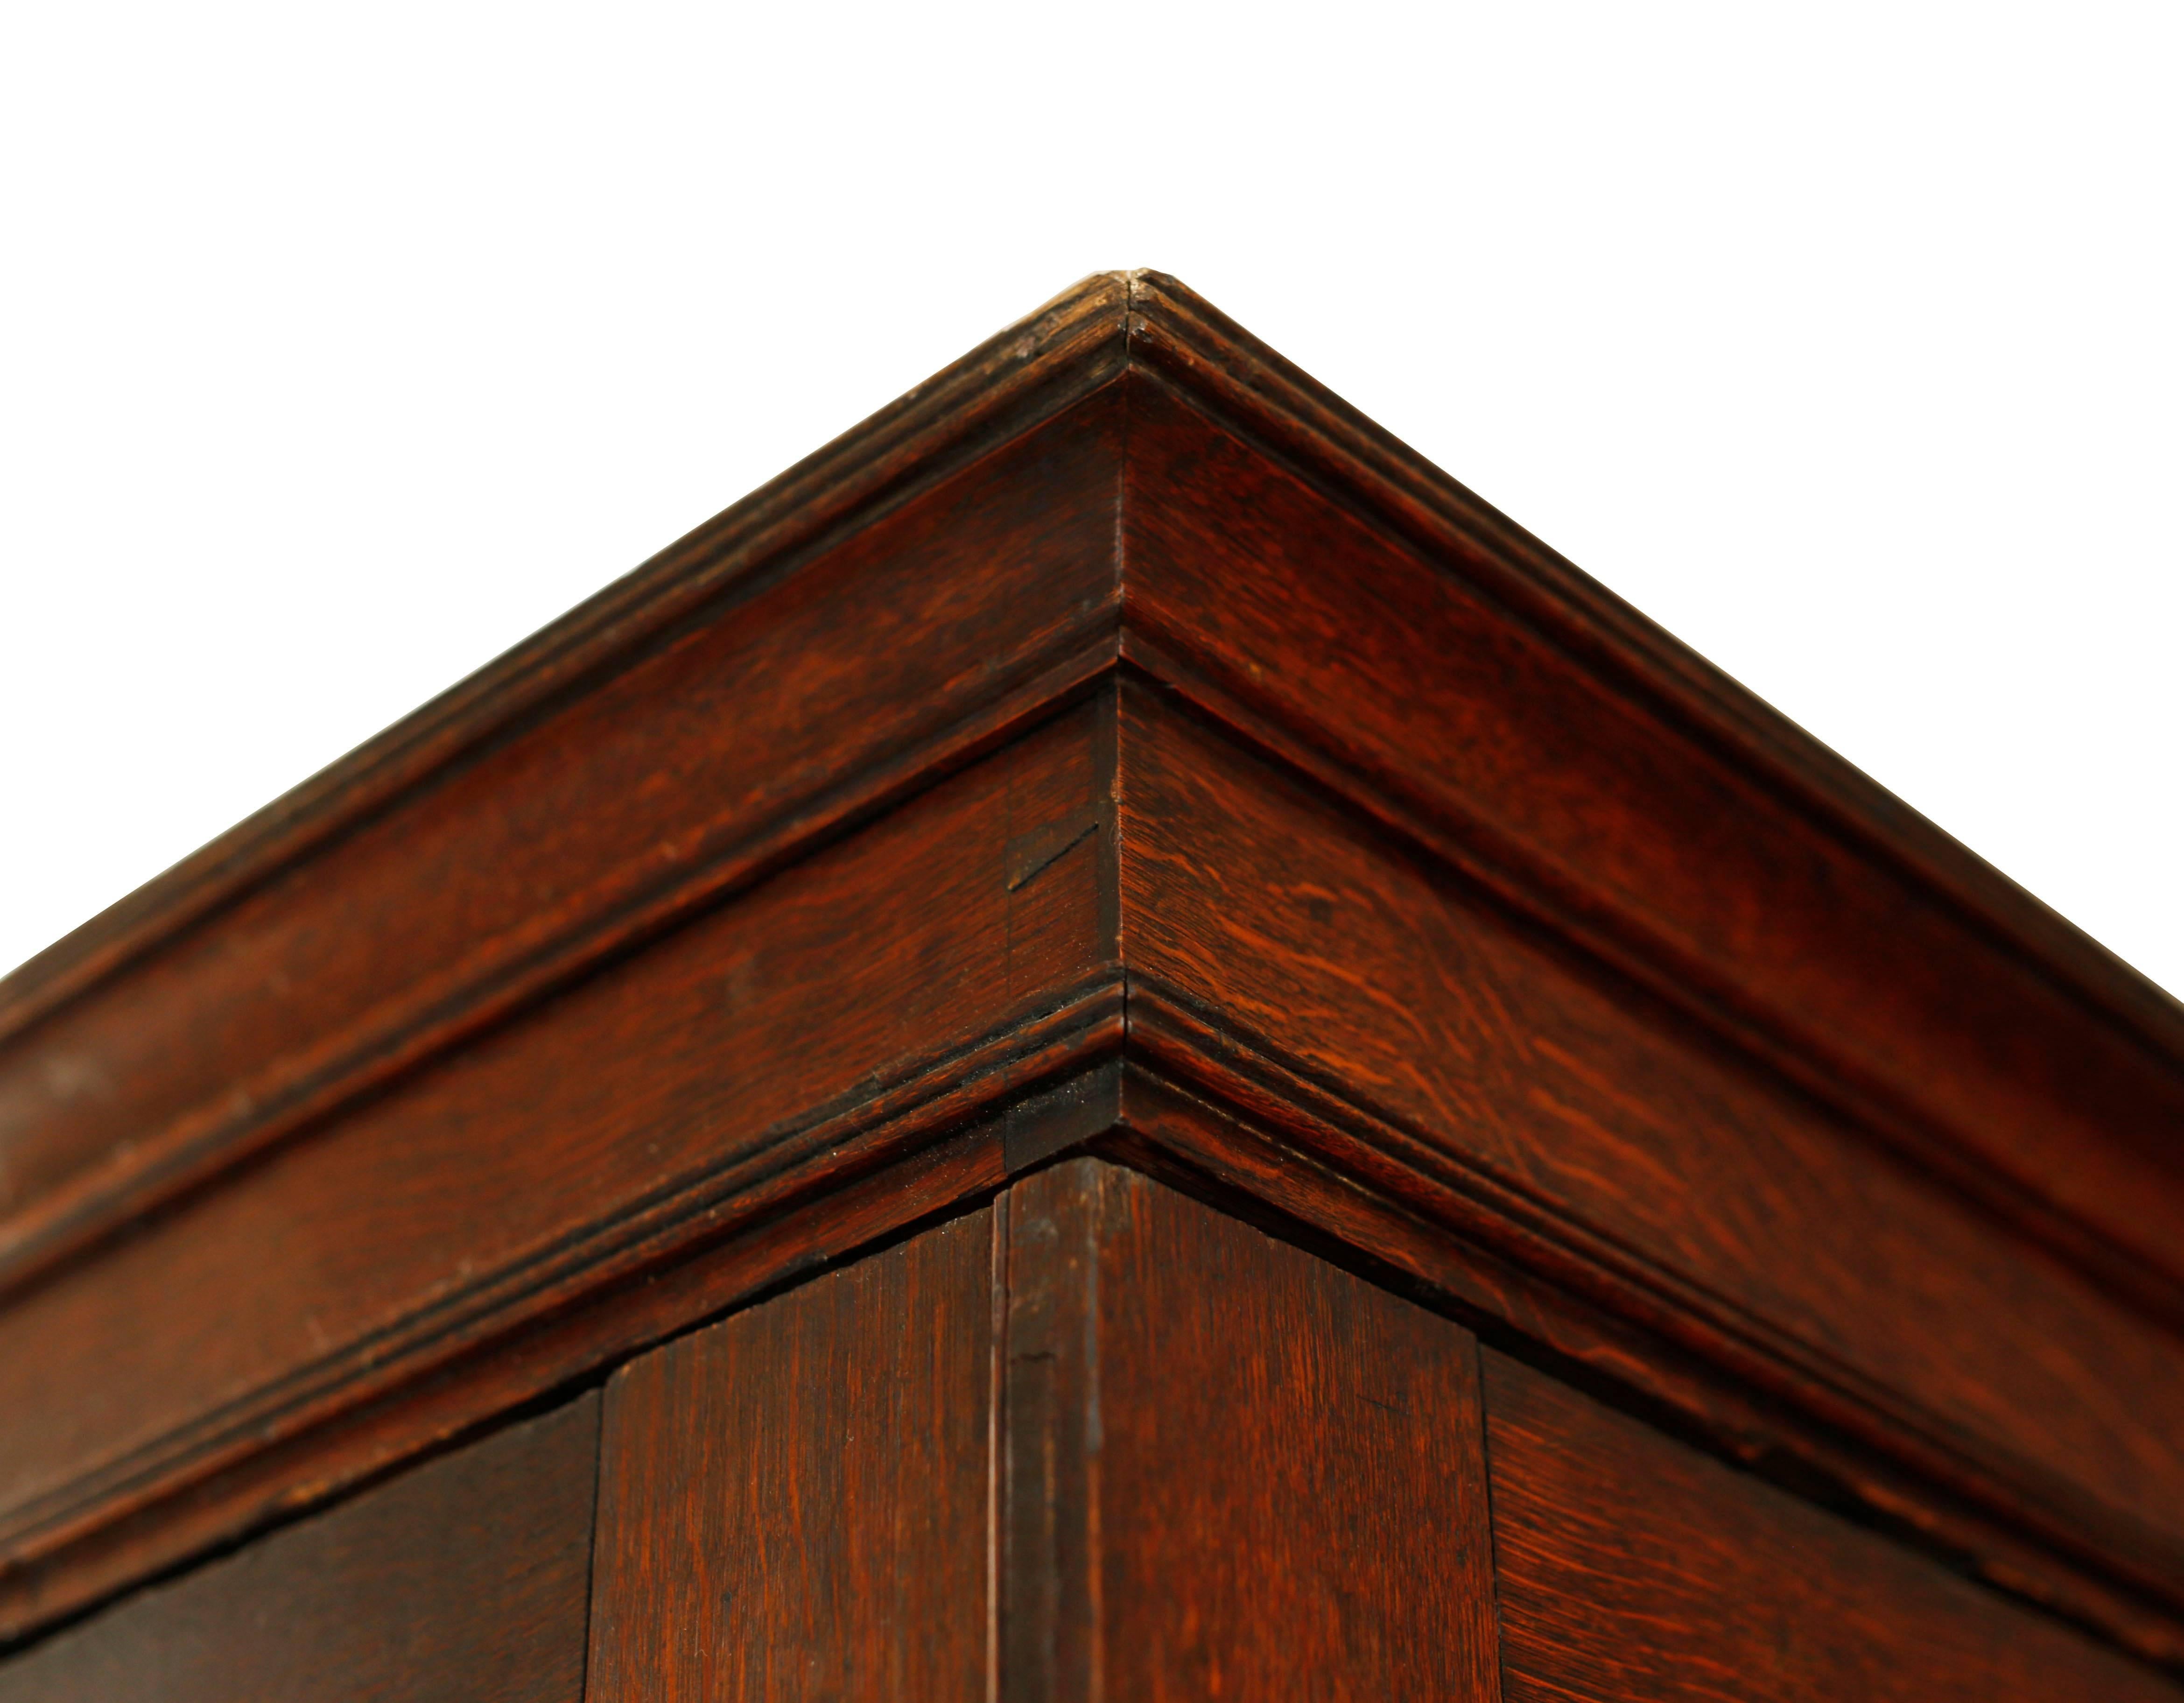 A stunning armoire with clean simple lines and masculine, handsome proportions. The coloring is particularly fine with a deep amber hue. The case sits on bun feet with concealed castors. A simple Covetto cornice crowns the top with fine incised